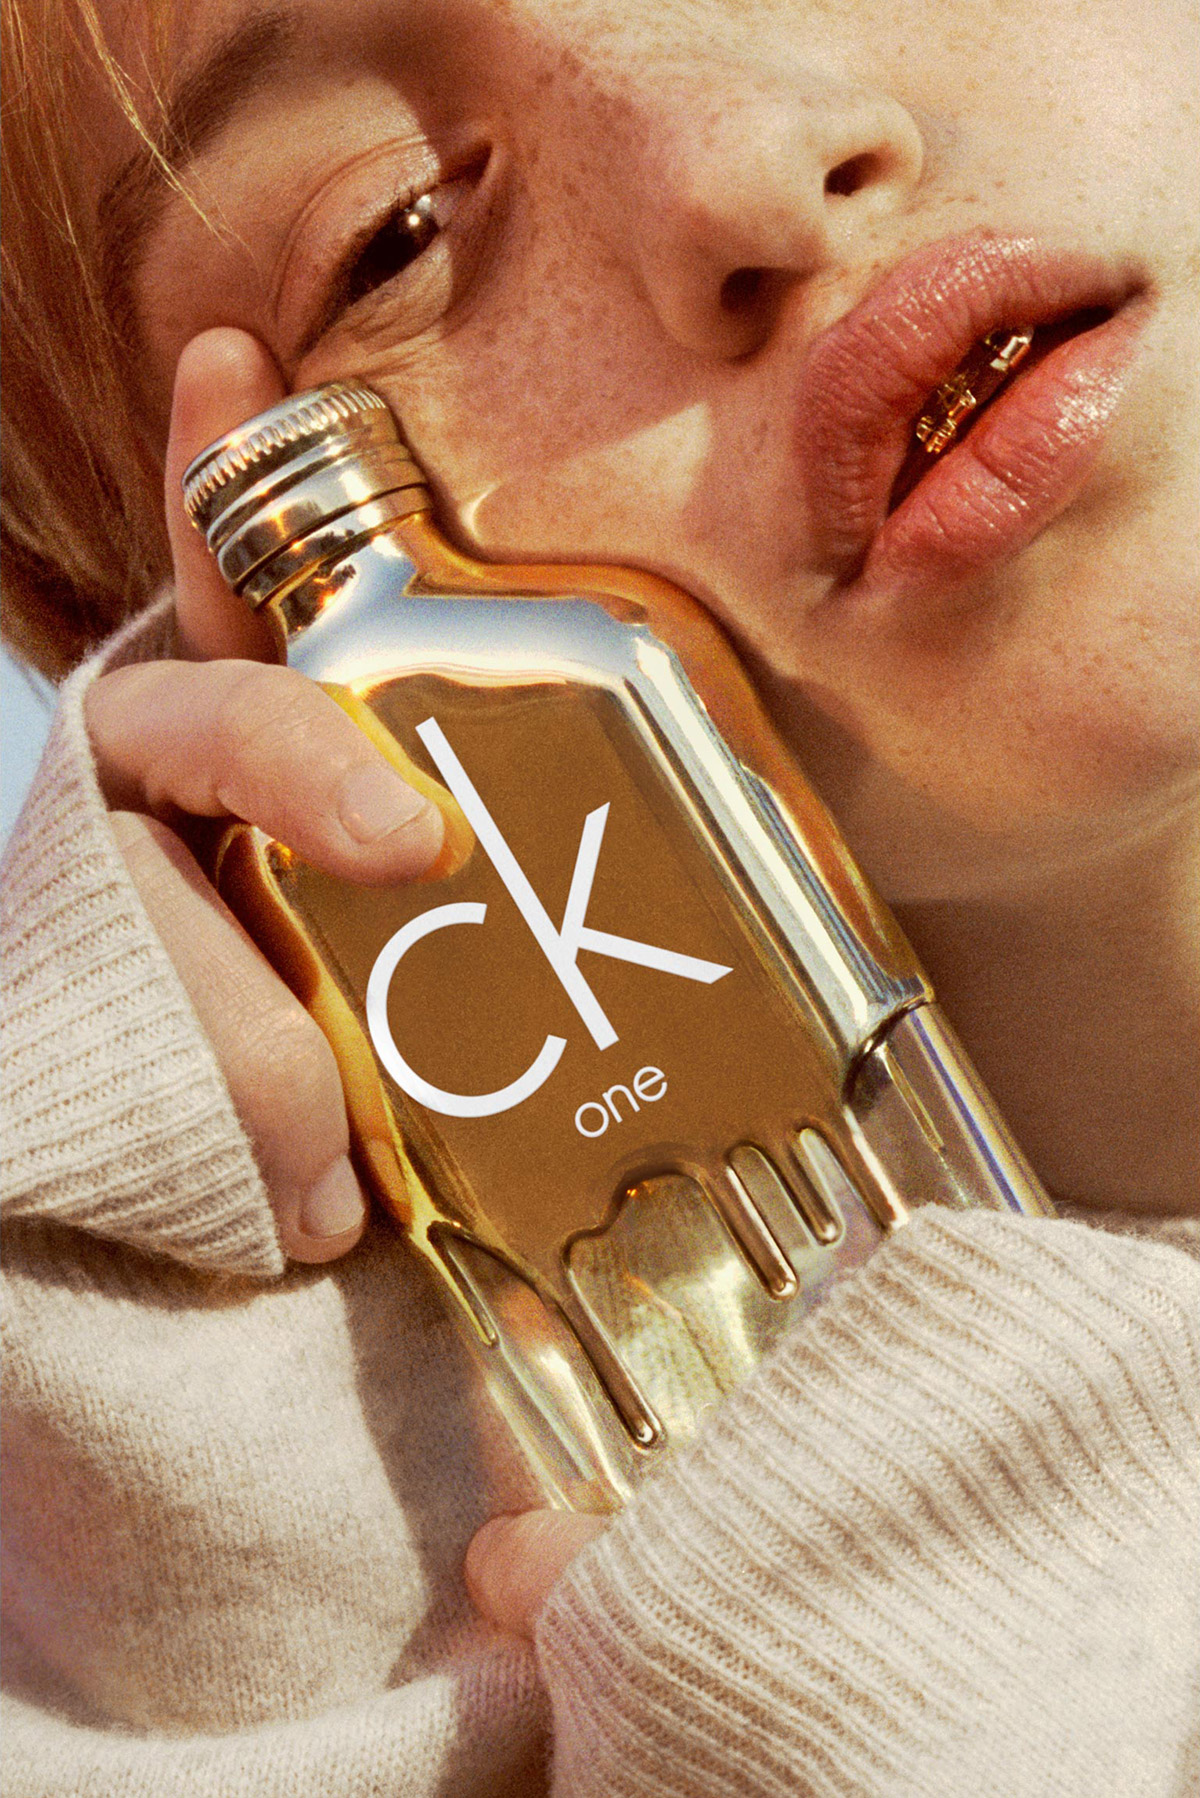 ck one gold edt